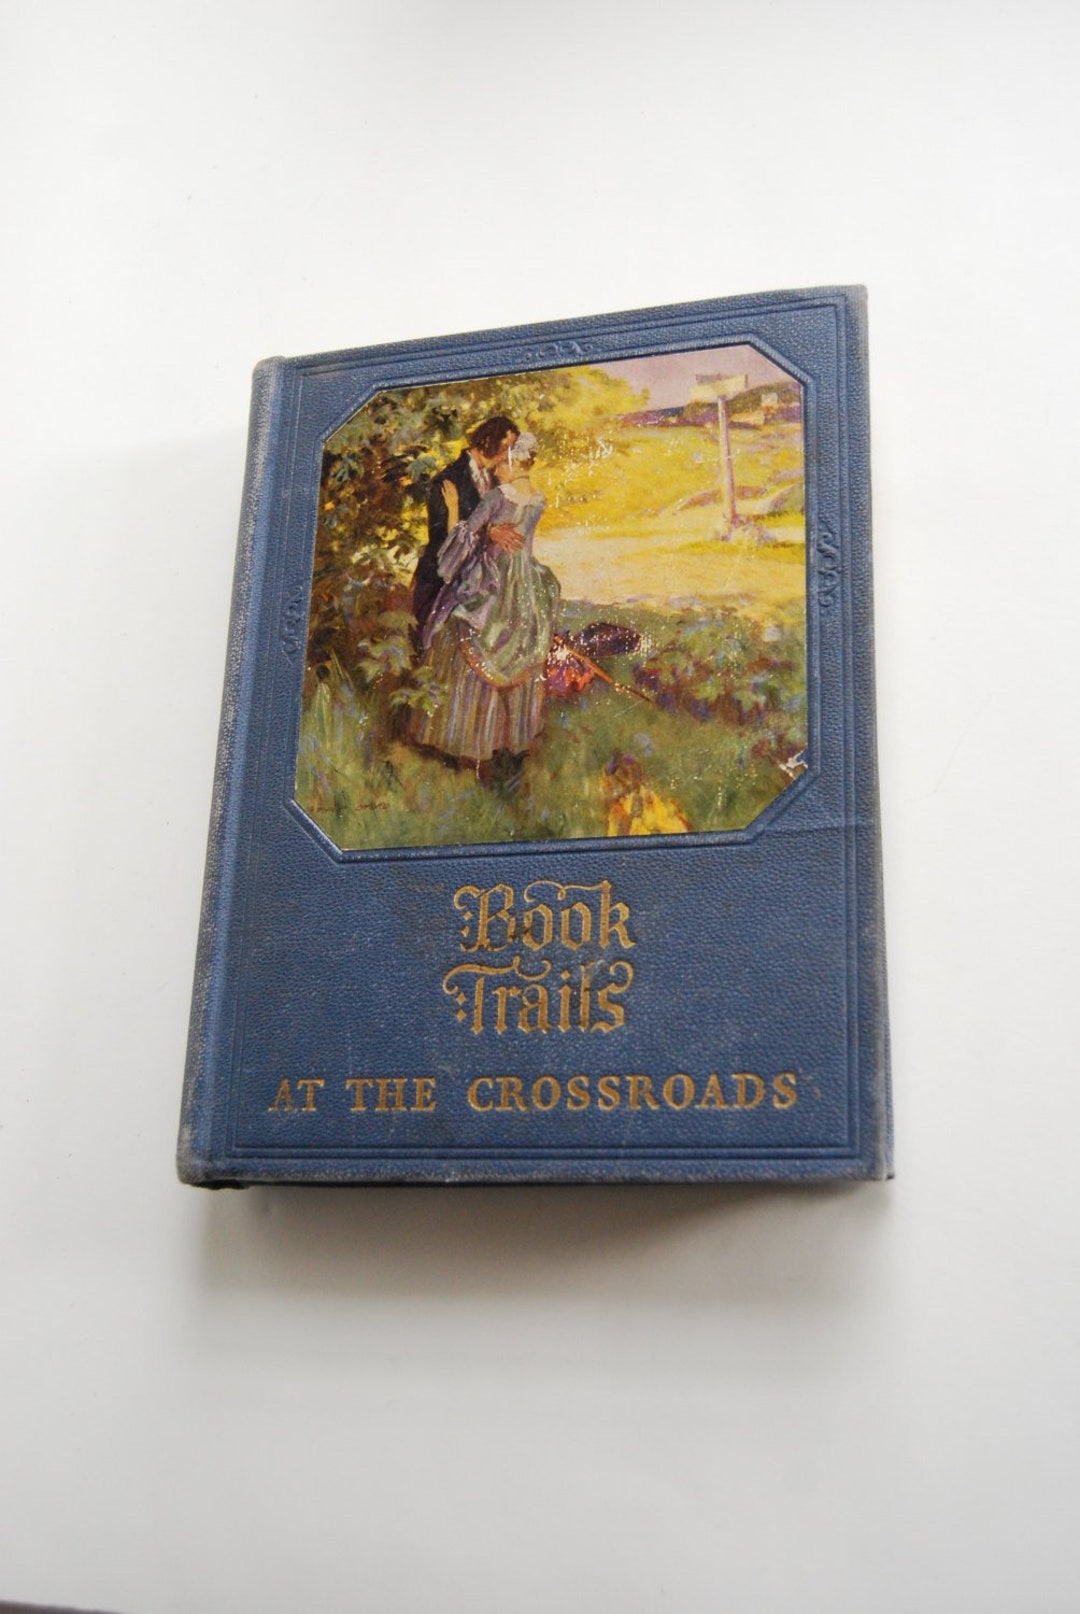 Vintage Book, Book Trails at the Crossroads - Etsy